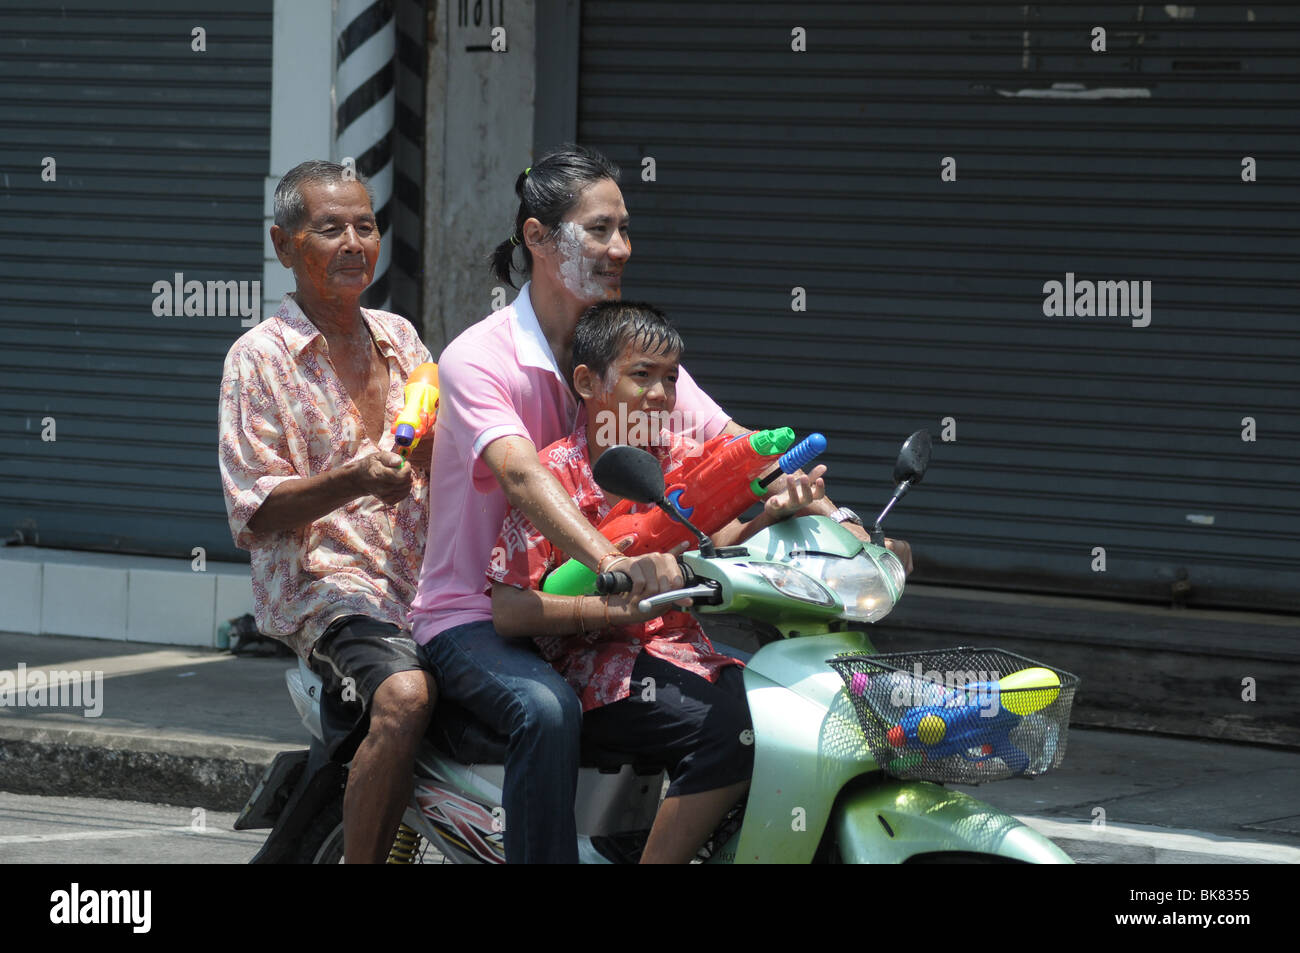 Three people on the back of a scooter during the Thai New Year or 'Songkran' fetsival Stock Photo